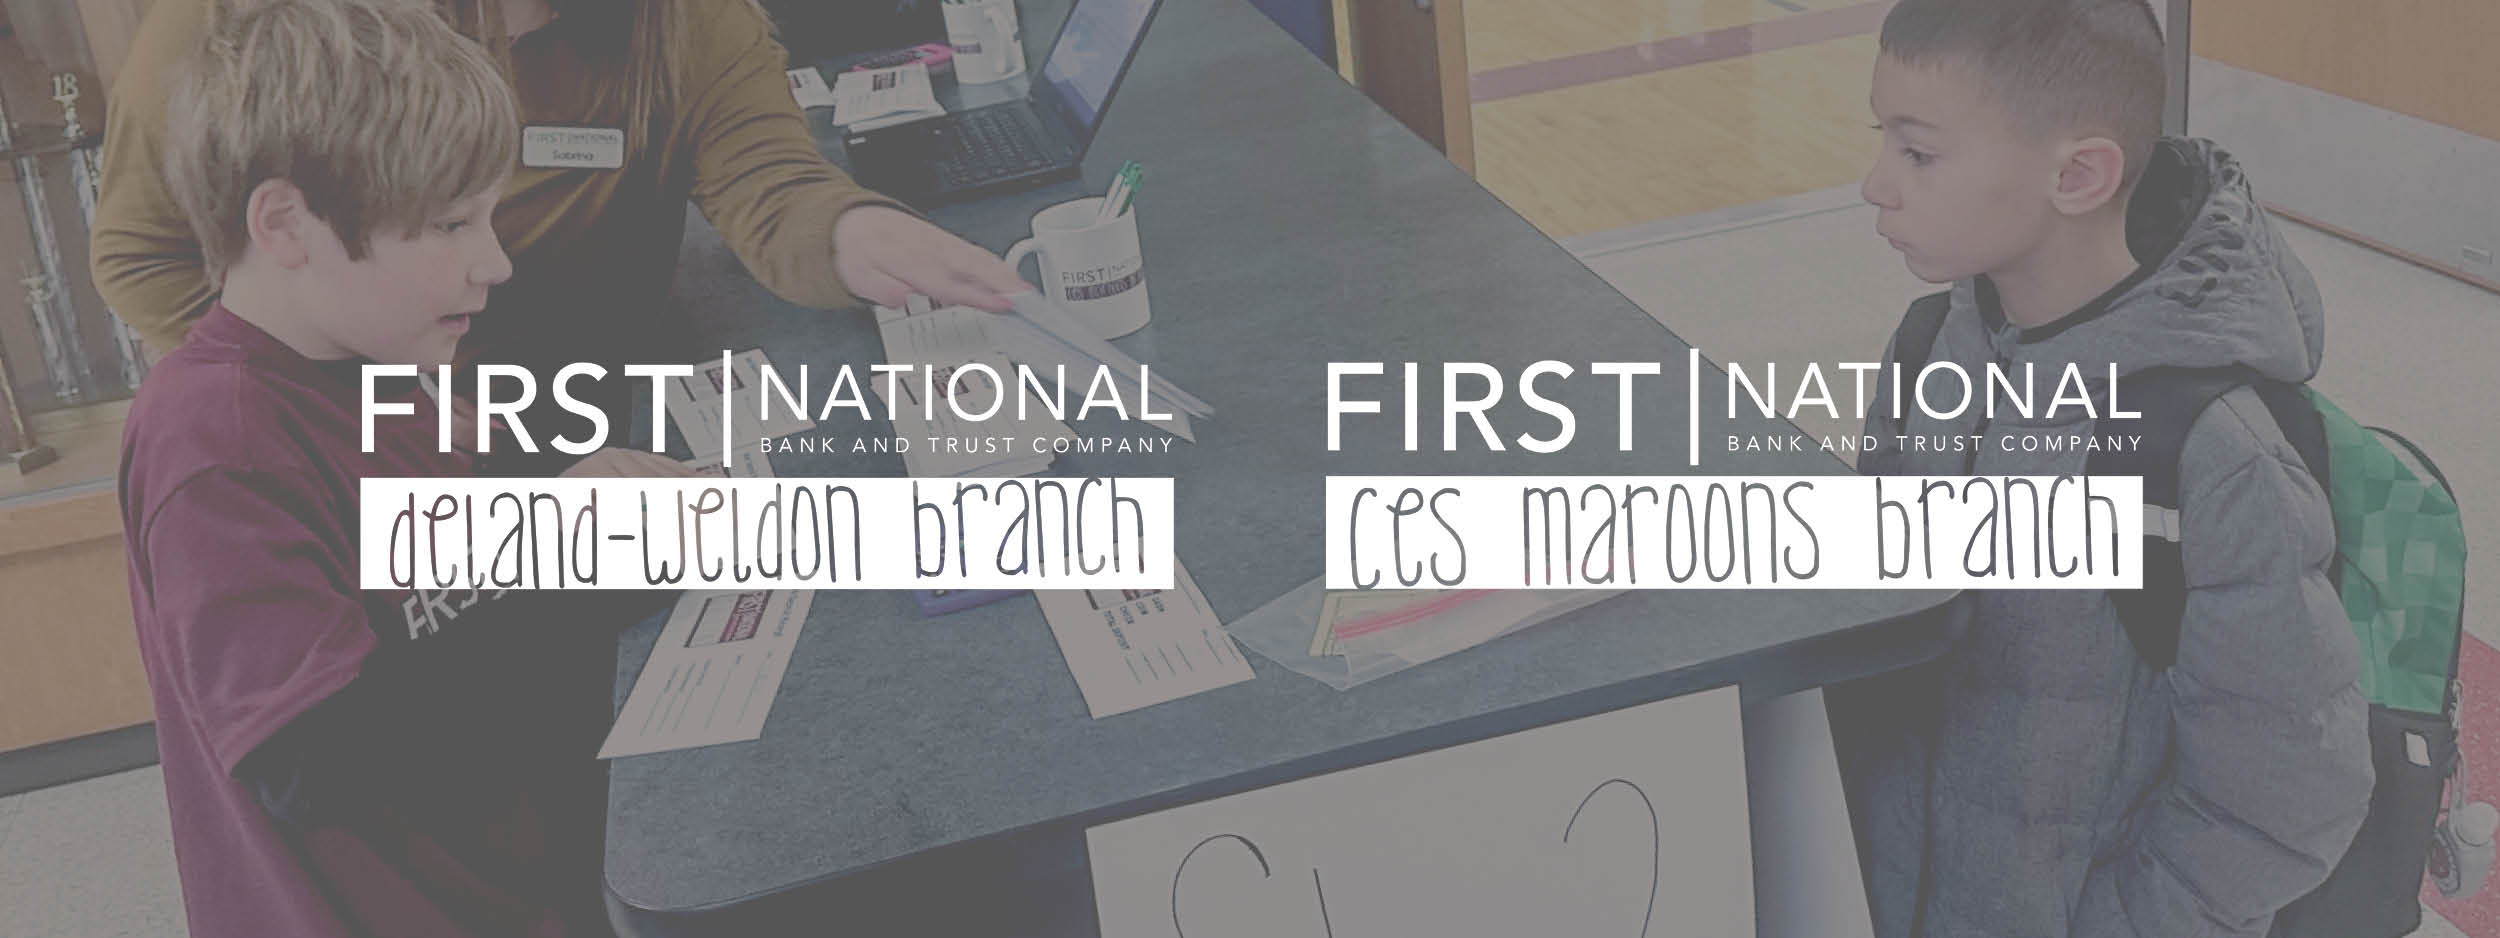 First National Bank Deland-Weldon and CES Maroons branc